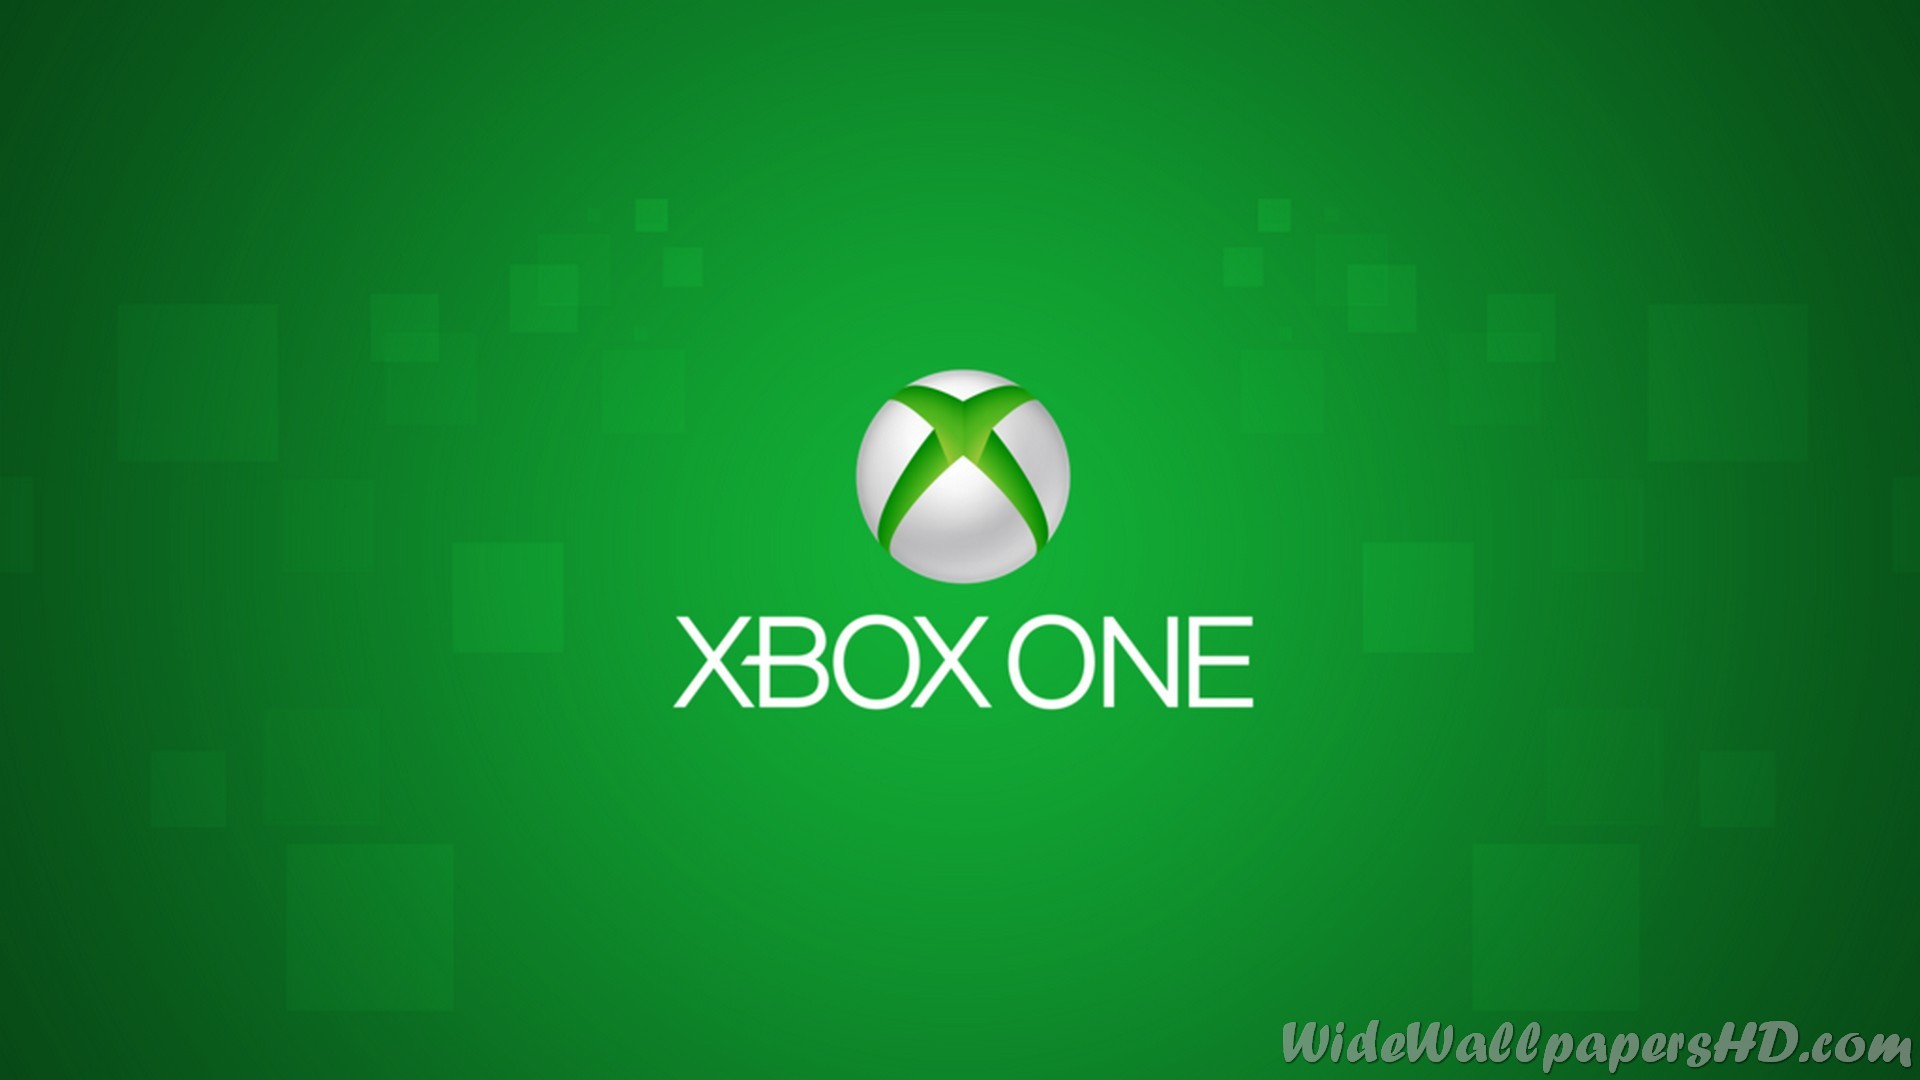 Xbox One Hd Images - Xbox One , HD Wallpaper & Backgrounds